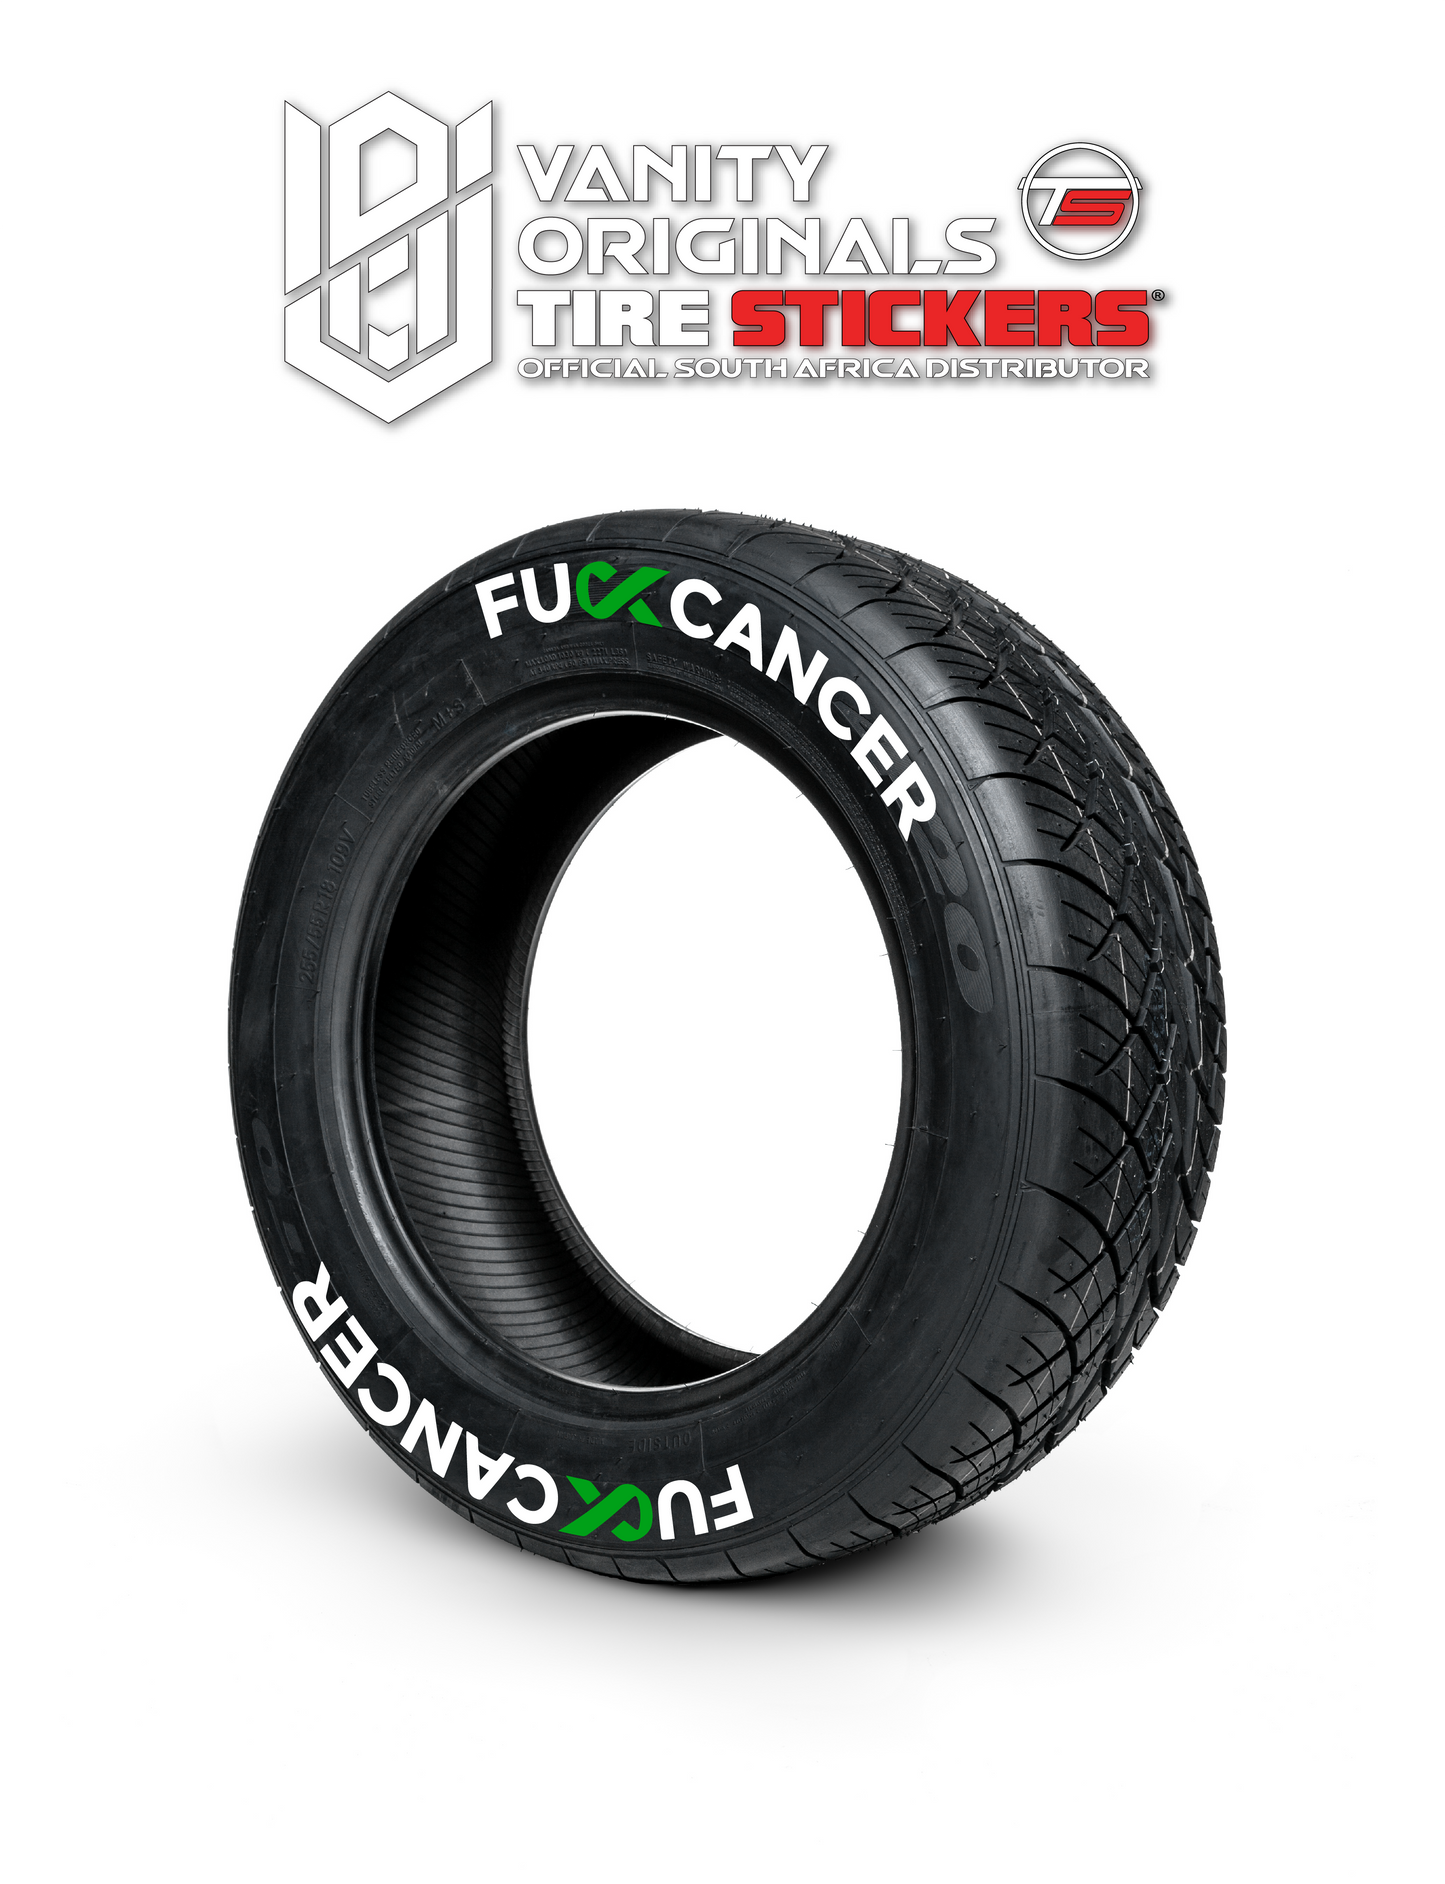 F-ck Cancer ( 8x Rubber Decals, Adhesive & Instructions Included )